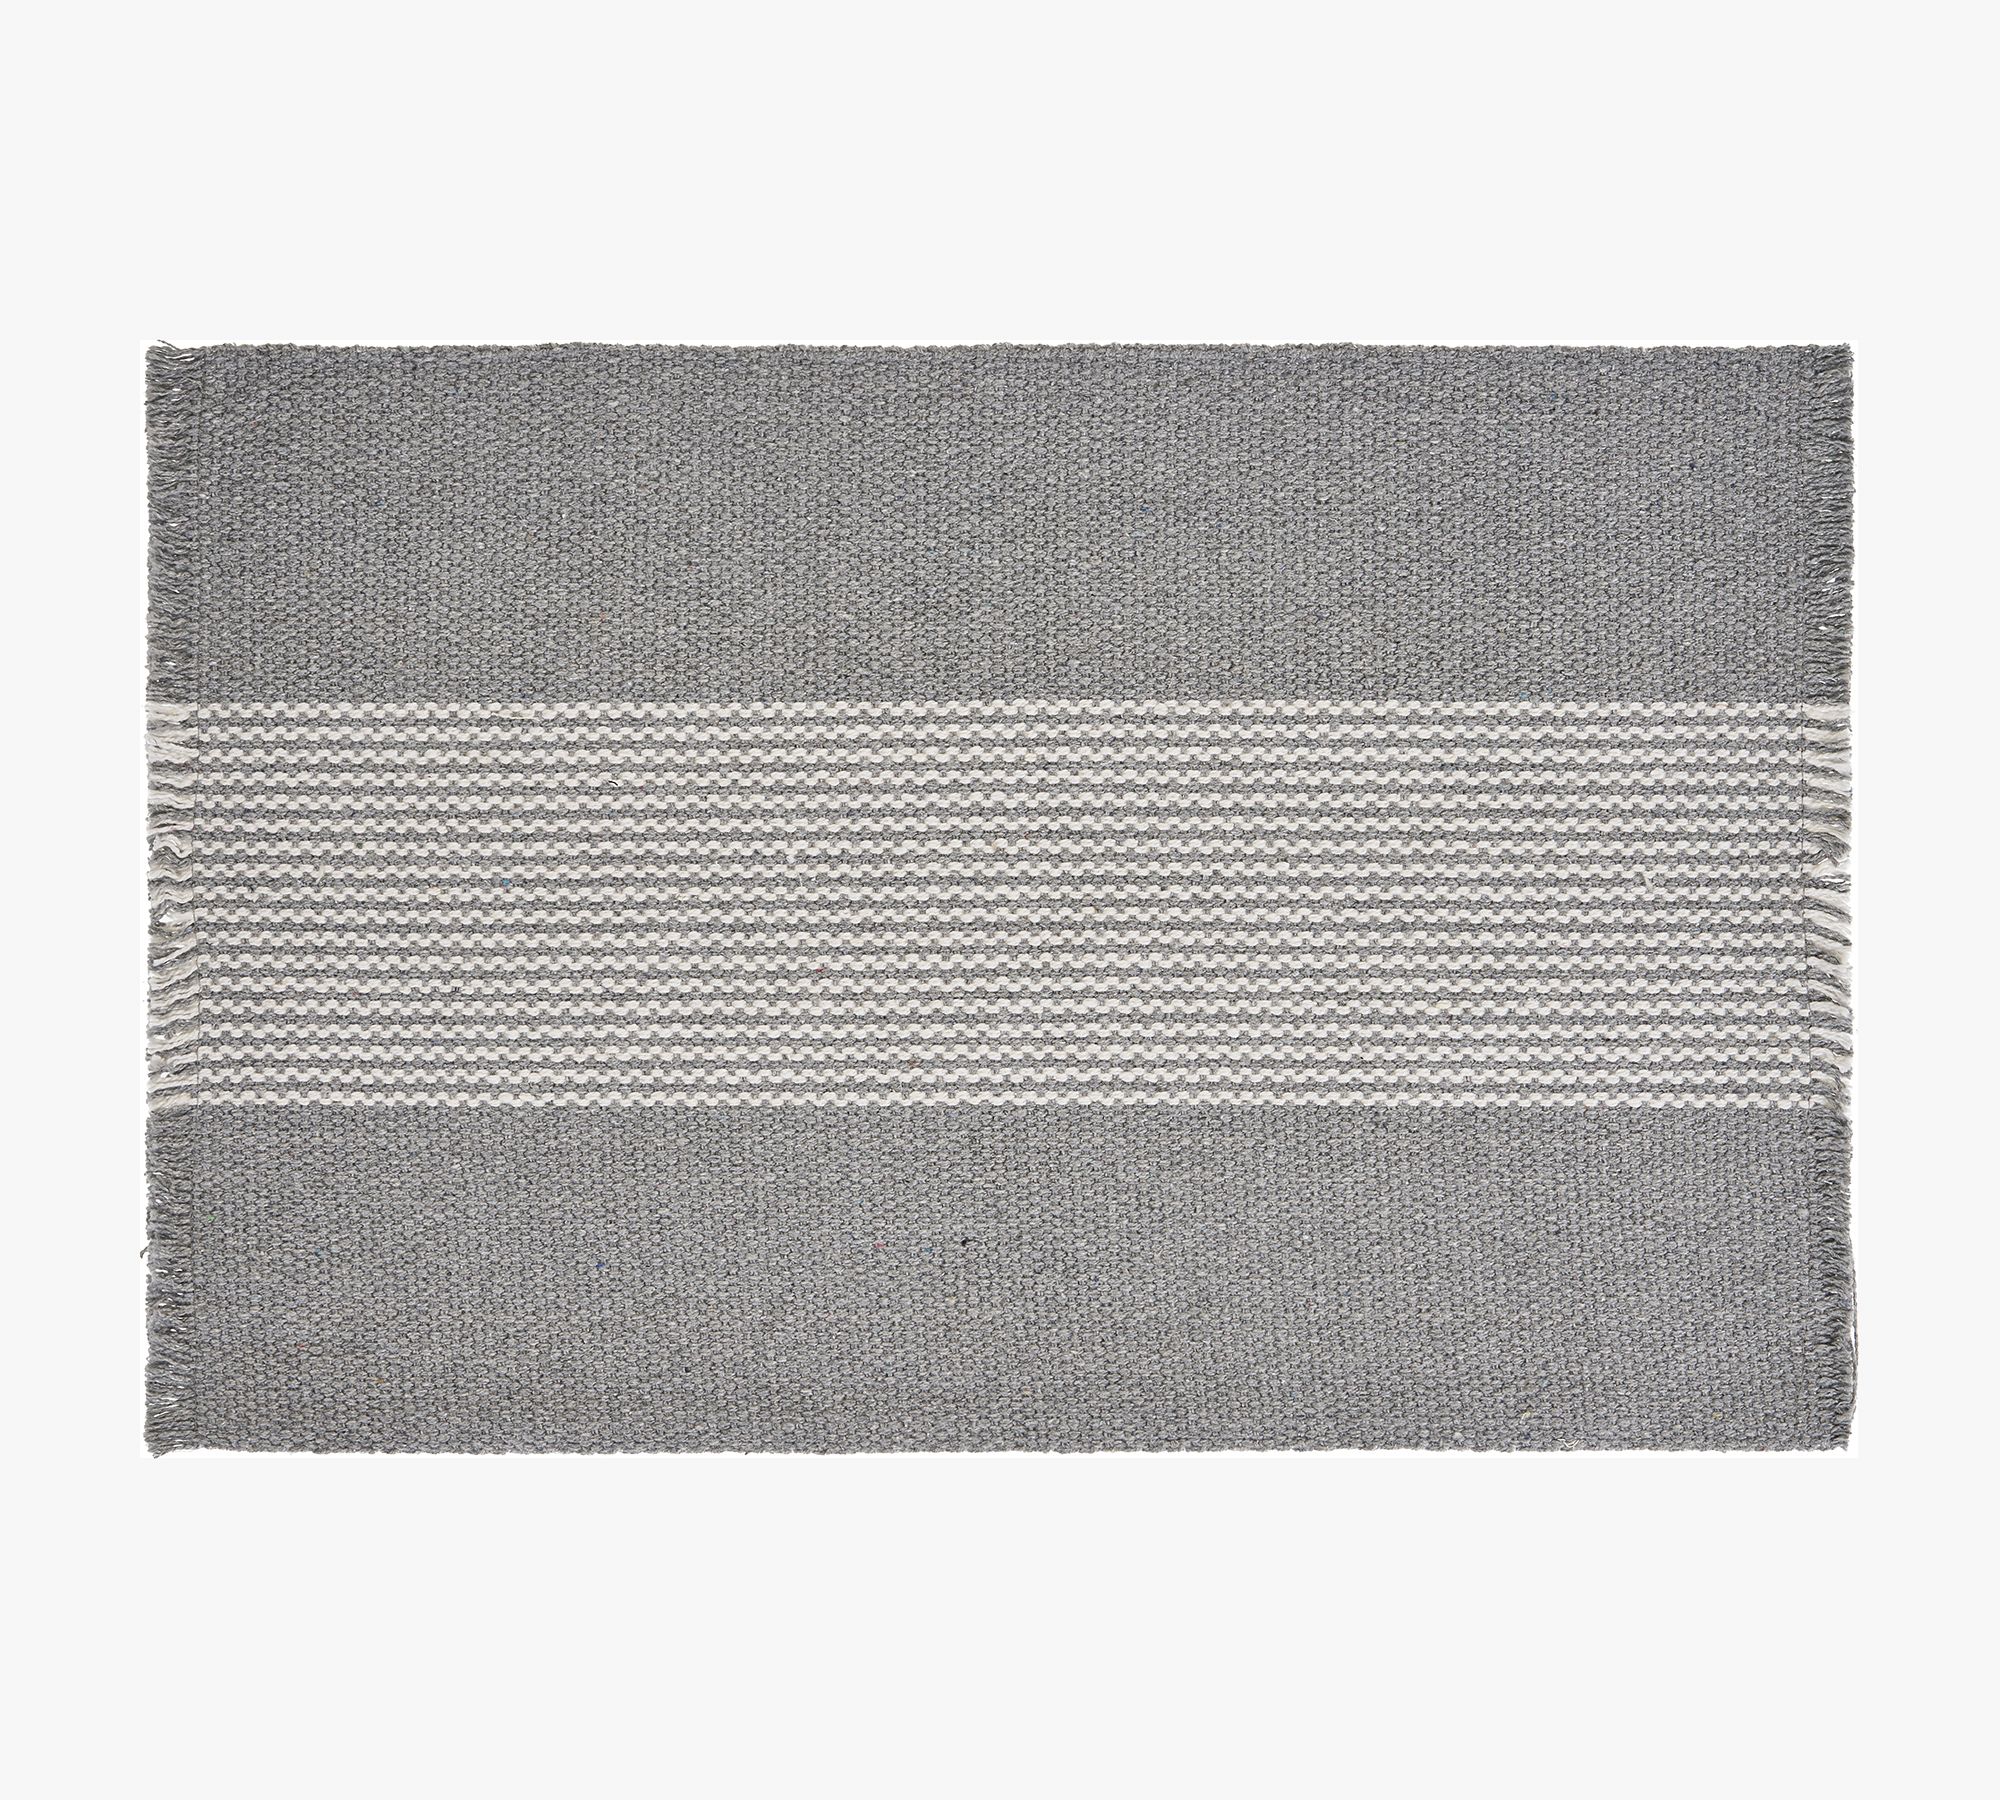 Striped Handwoven Cotton Placemats - Set of 4